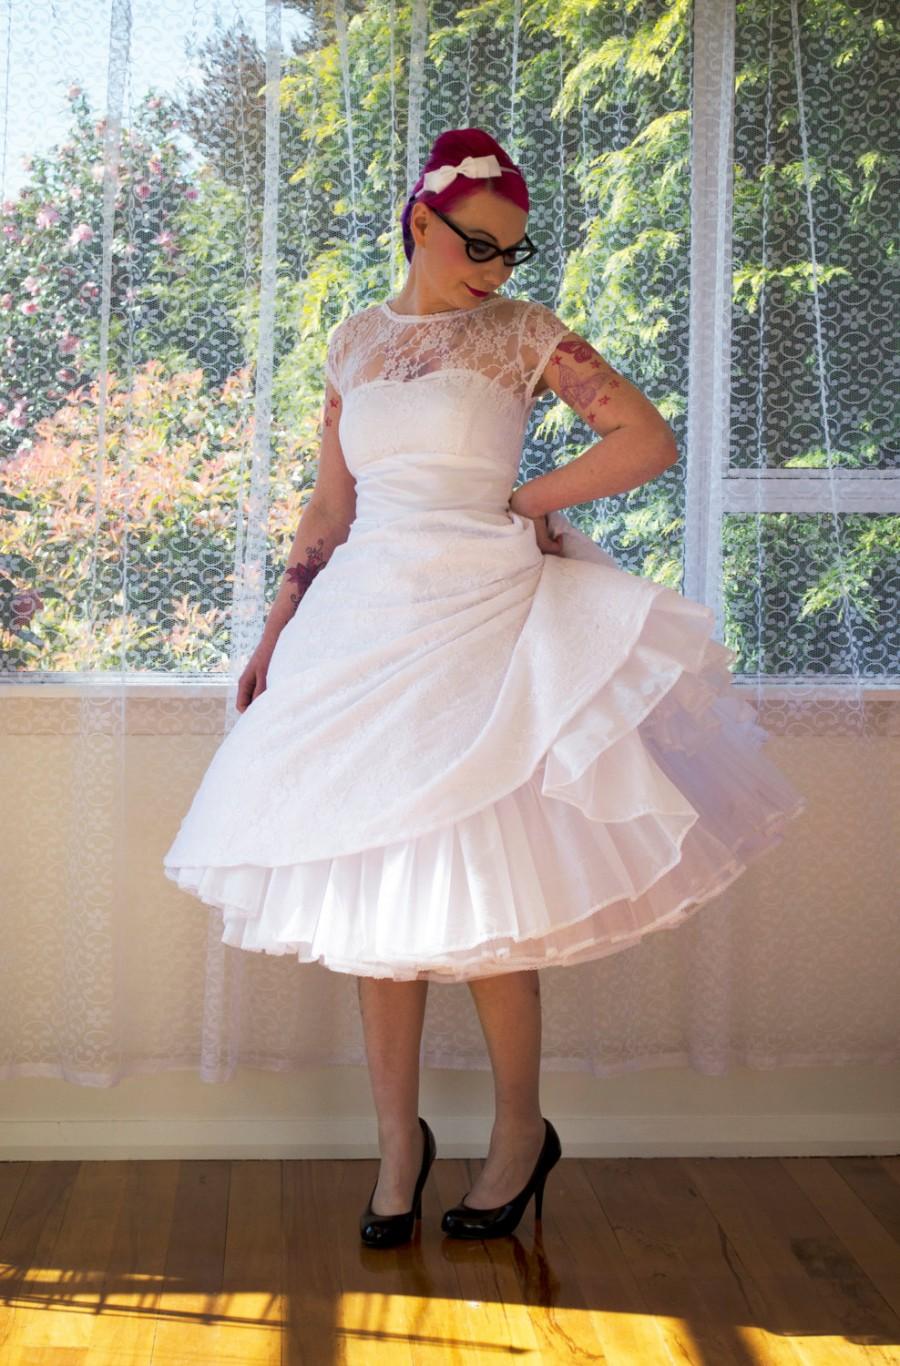 Wedding - 1950s Rockabilly Wedding Dress 'Lacey' with Lace Overlay, Sweetheart Neckline, Tea Length Skirt and Petticoat - Custom made to fit